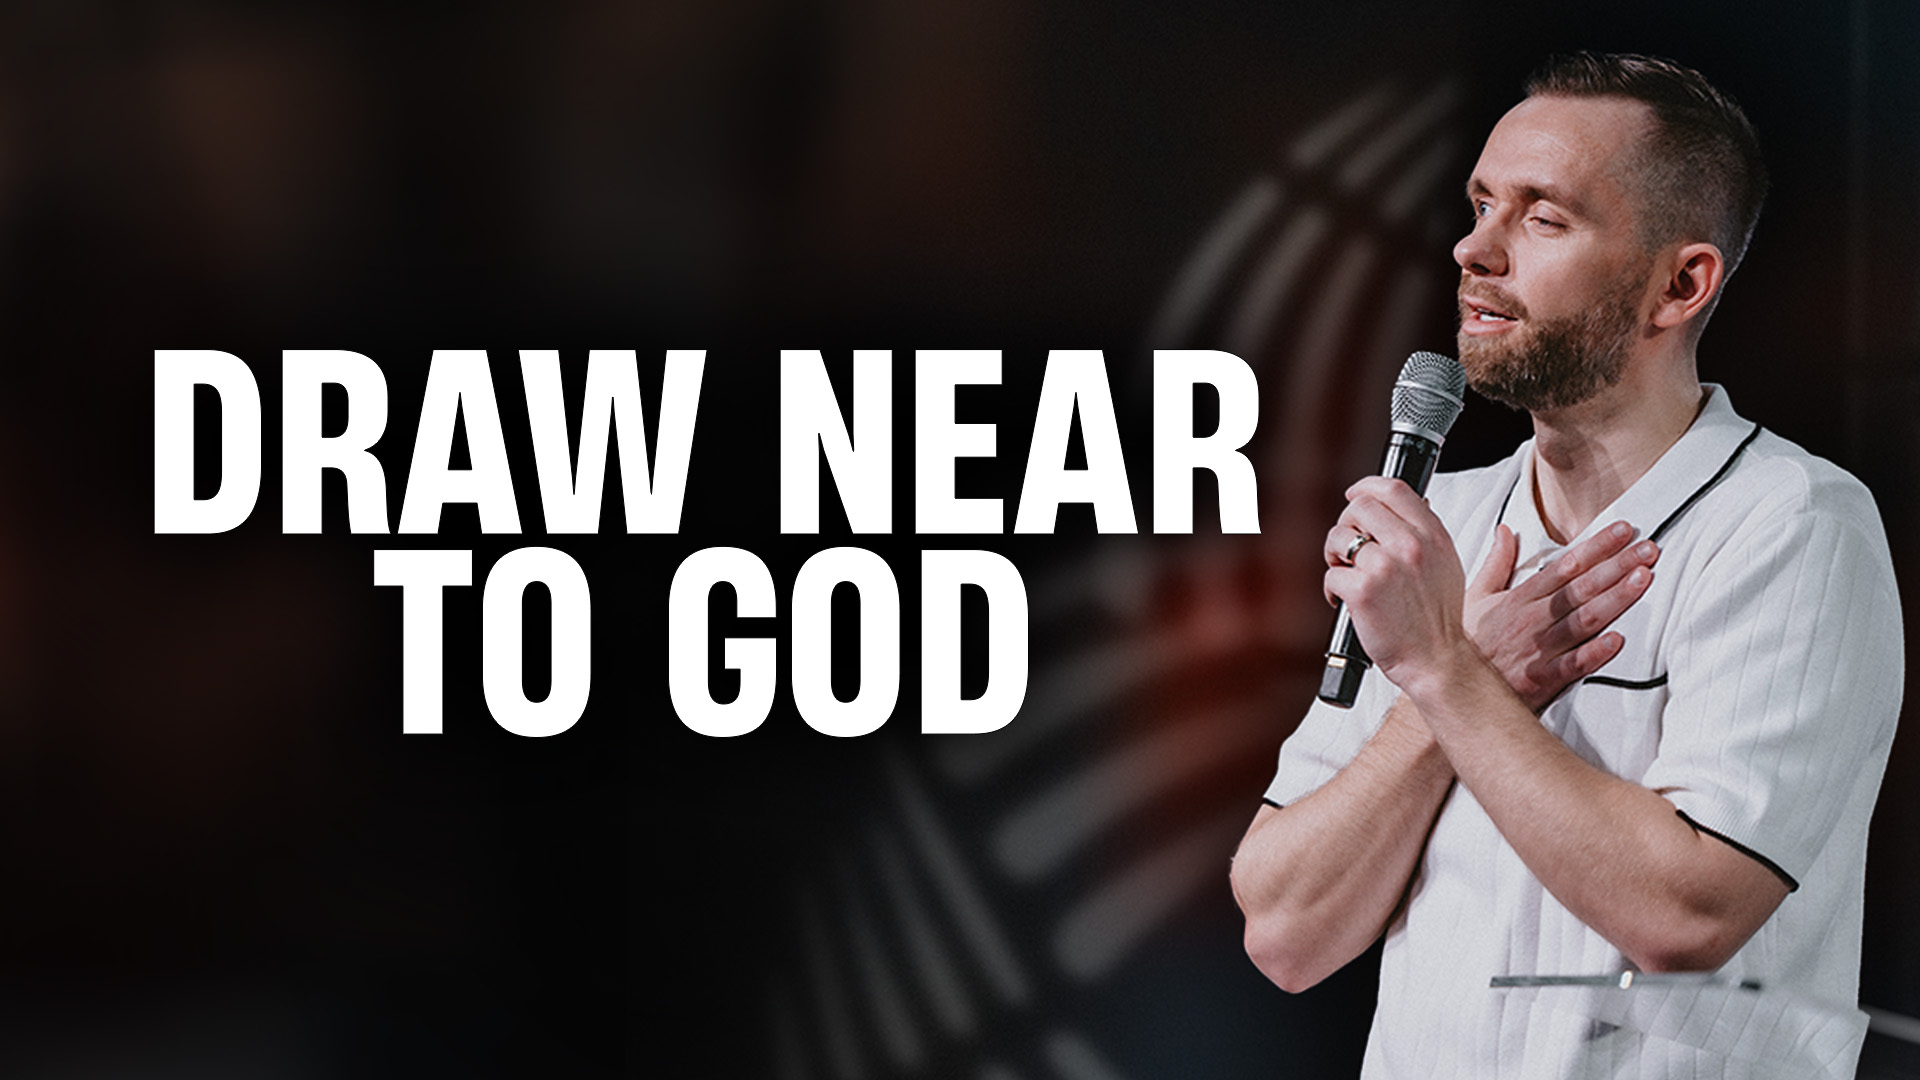 Featured Image for “Draw Near to God”